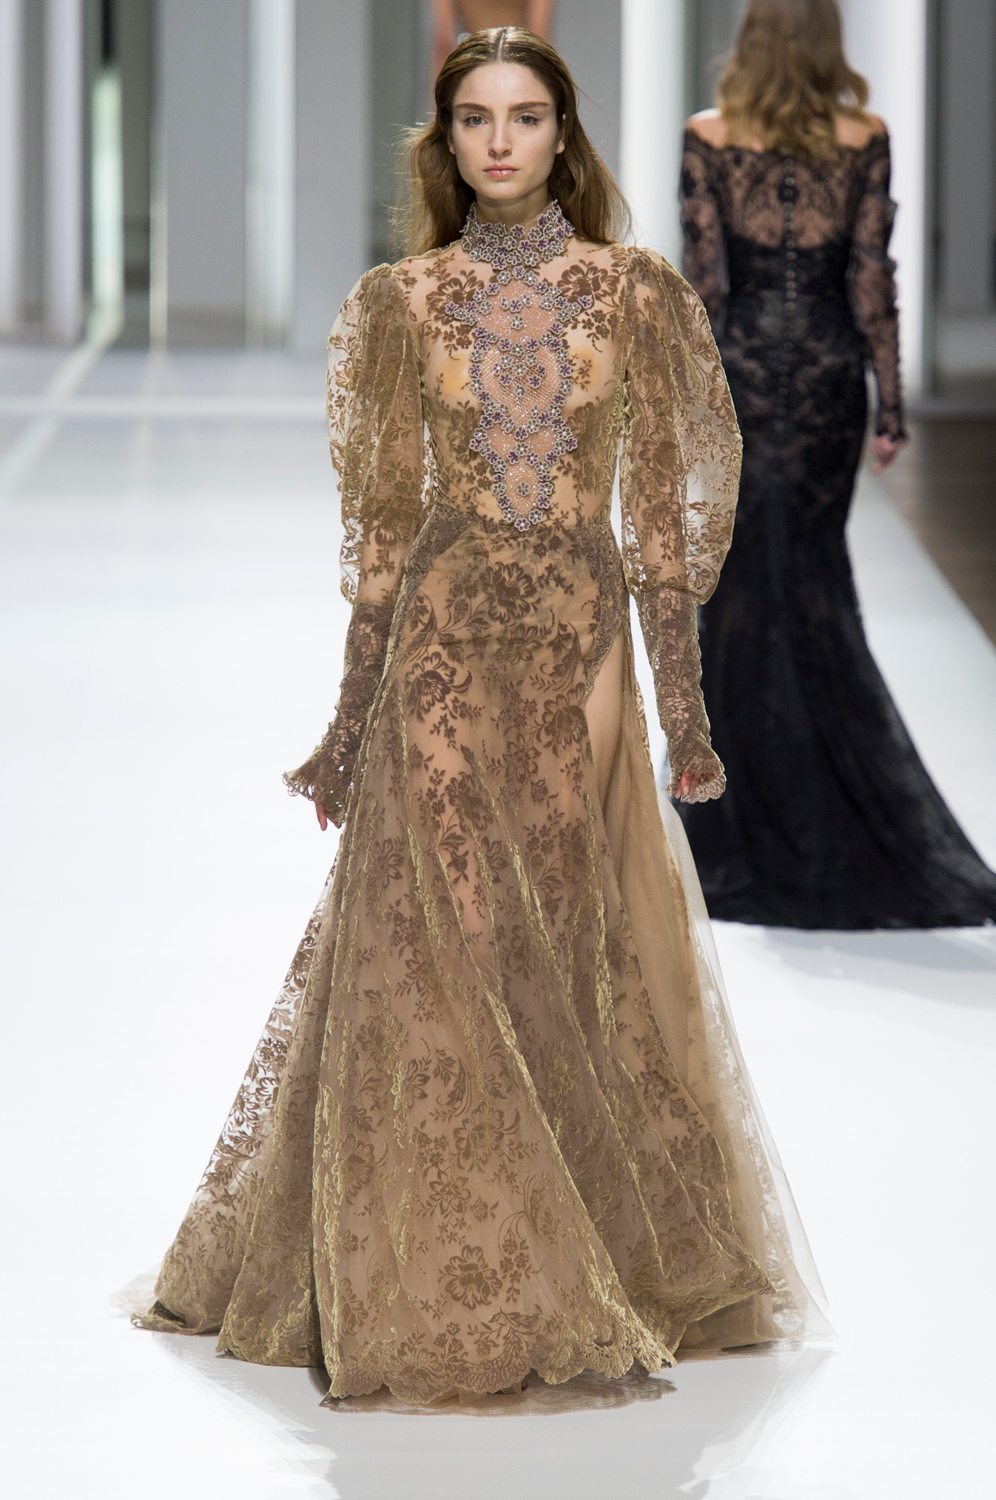 The 12 Best Looks from the Haute Couture Runways - FASHION Magazine